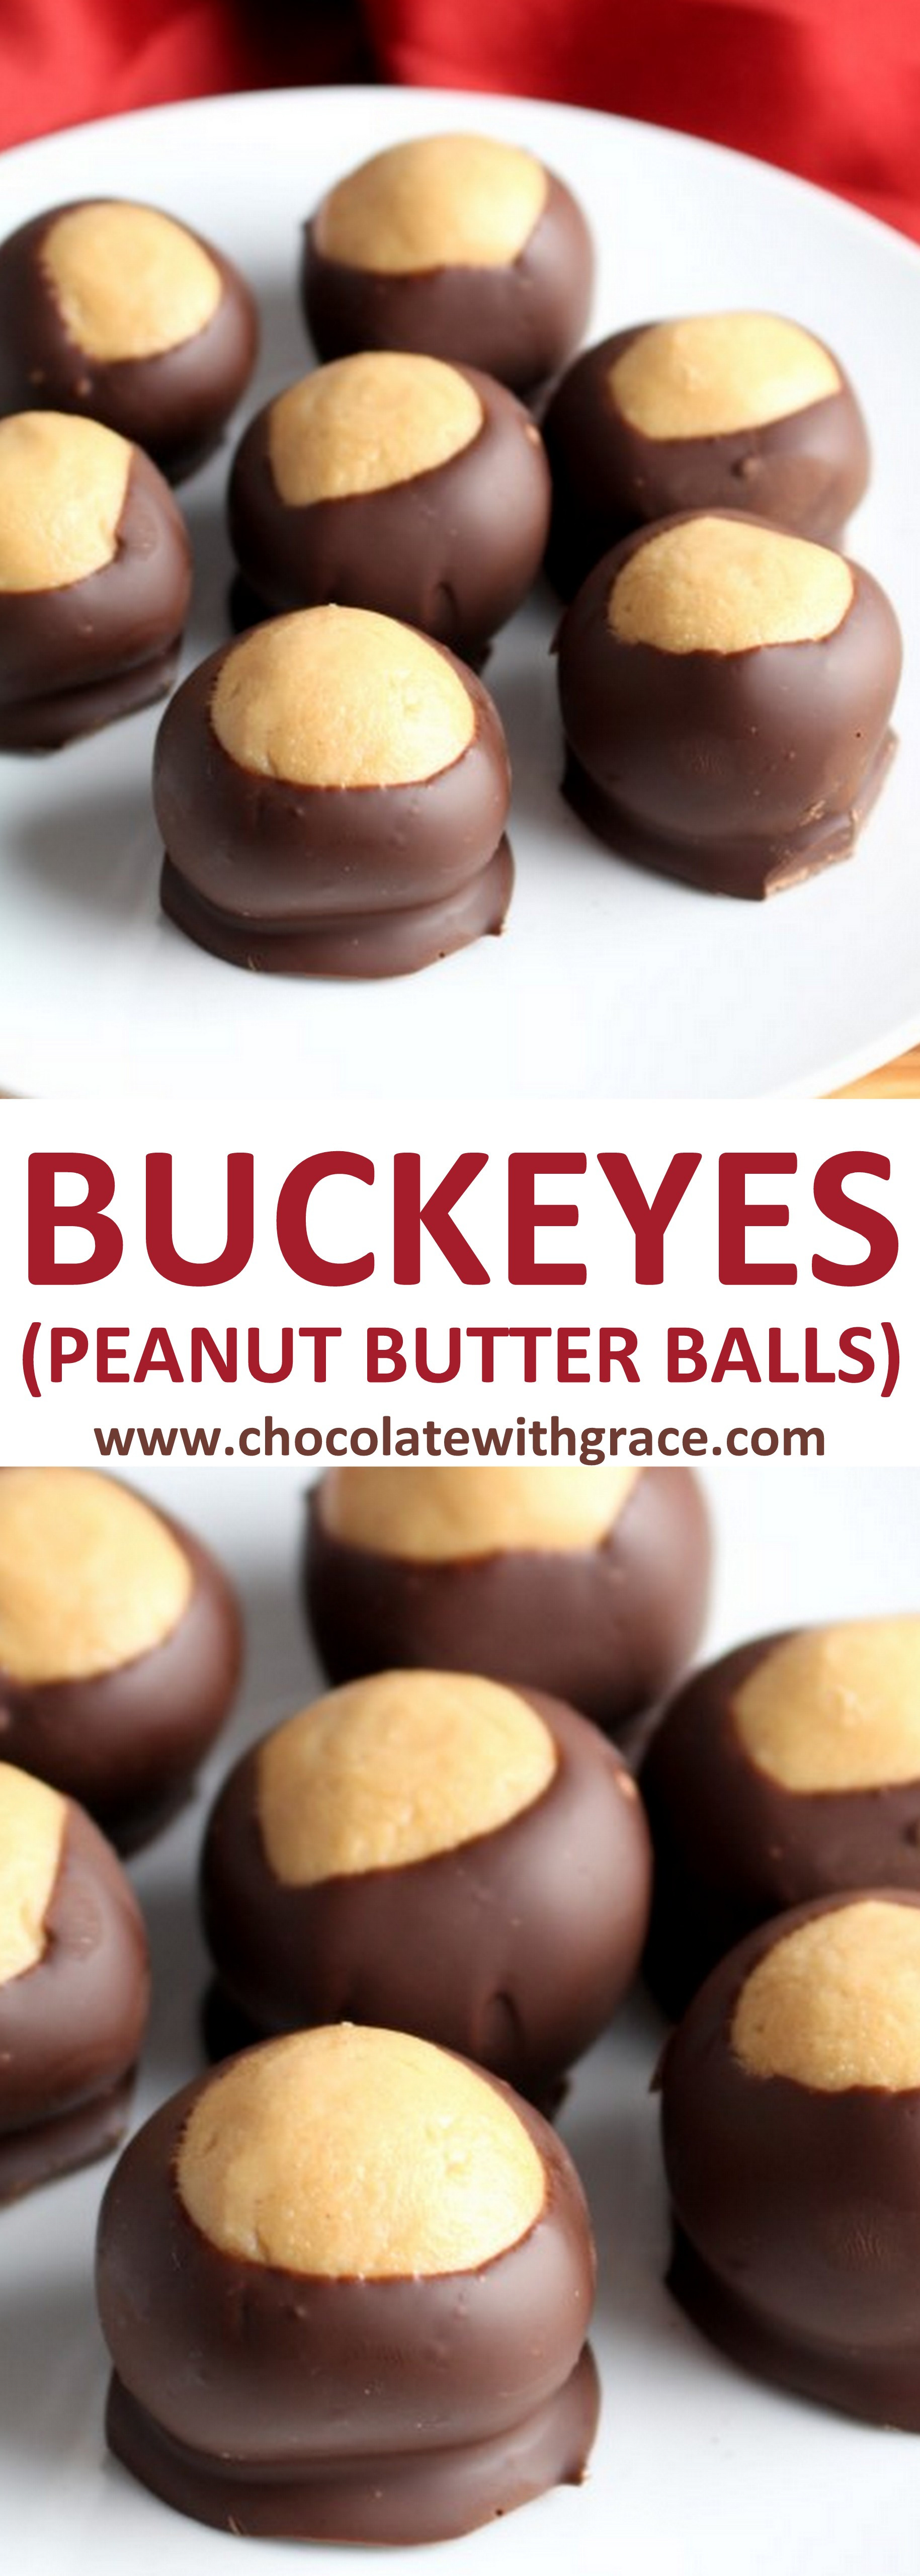 Peanut Butter Christmas Candy
 Buckeyes Peanut Butter Balls Chocolate With Grace